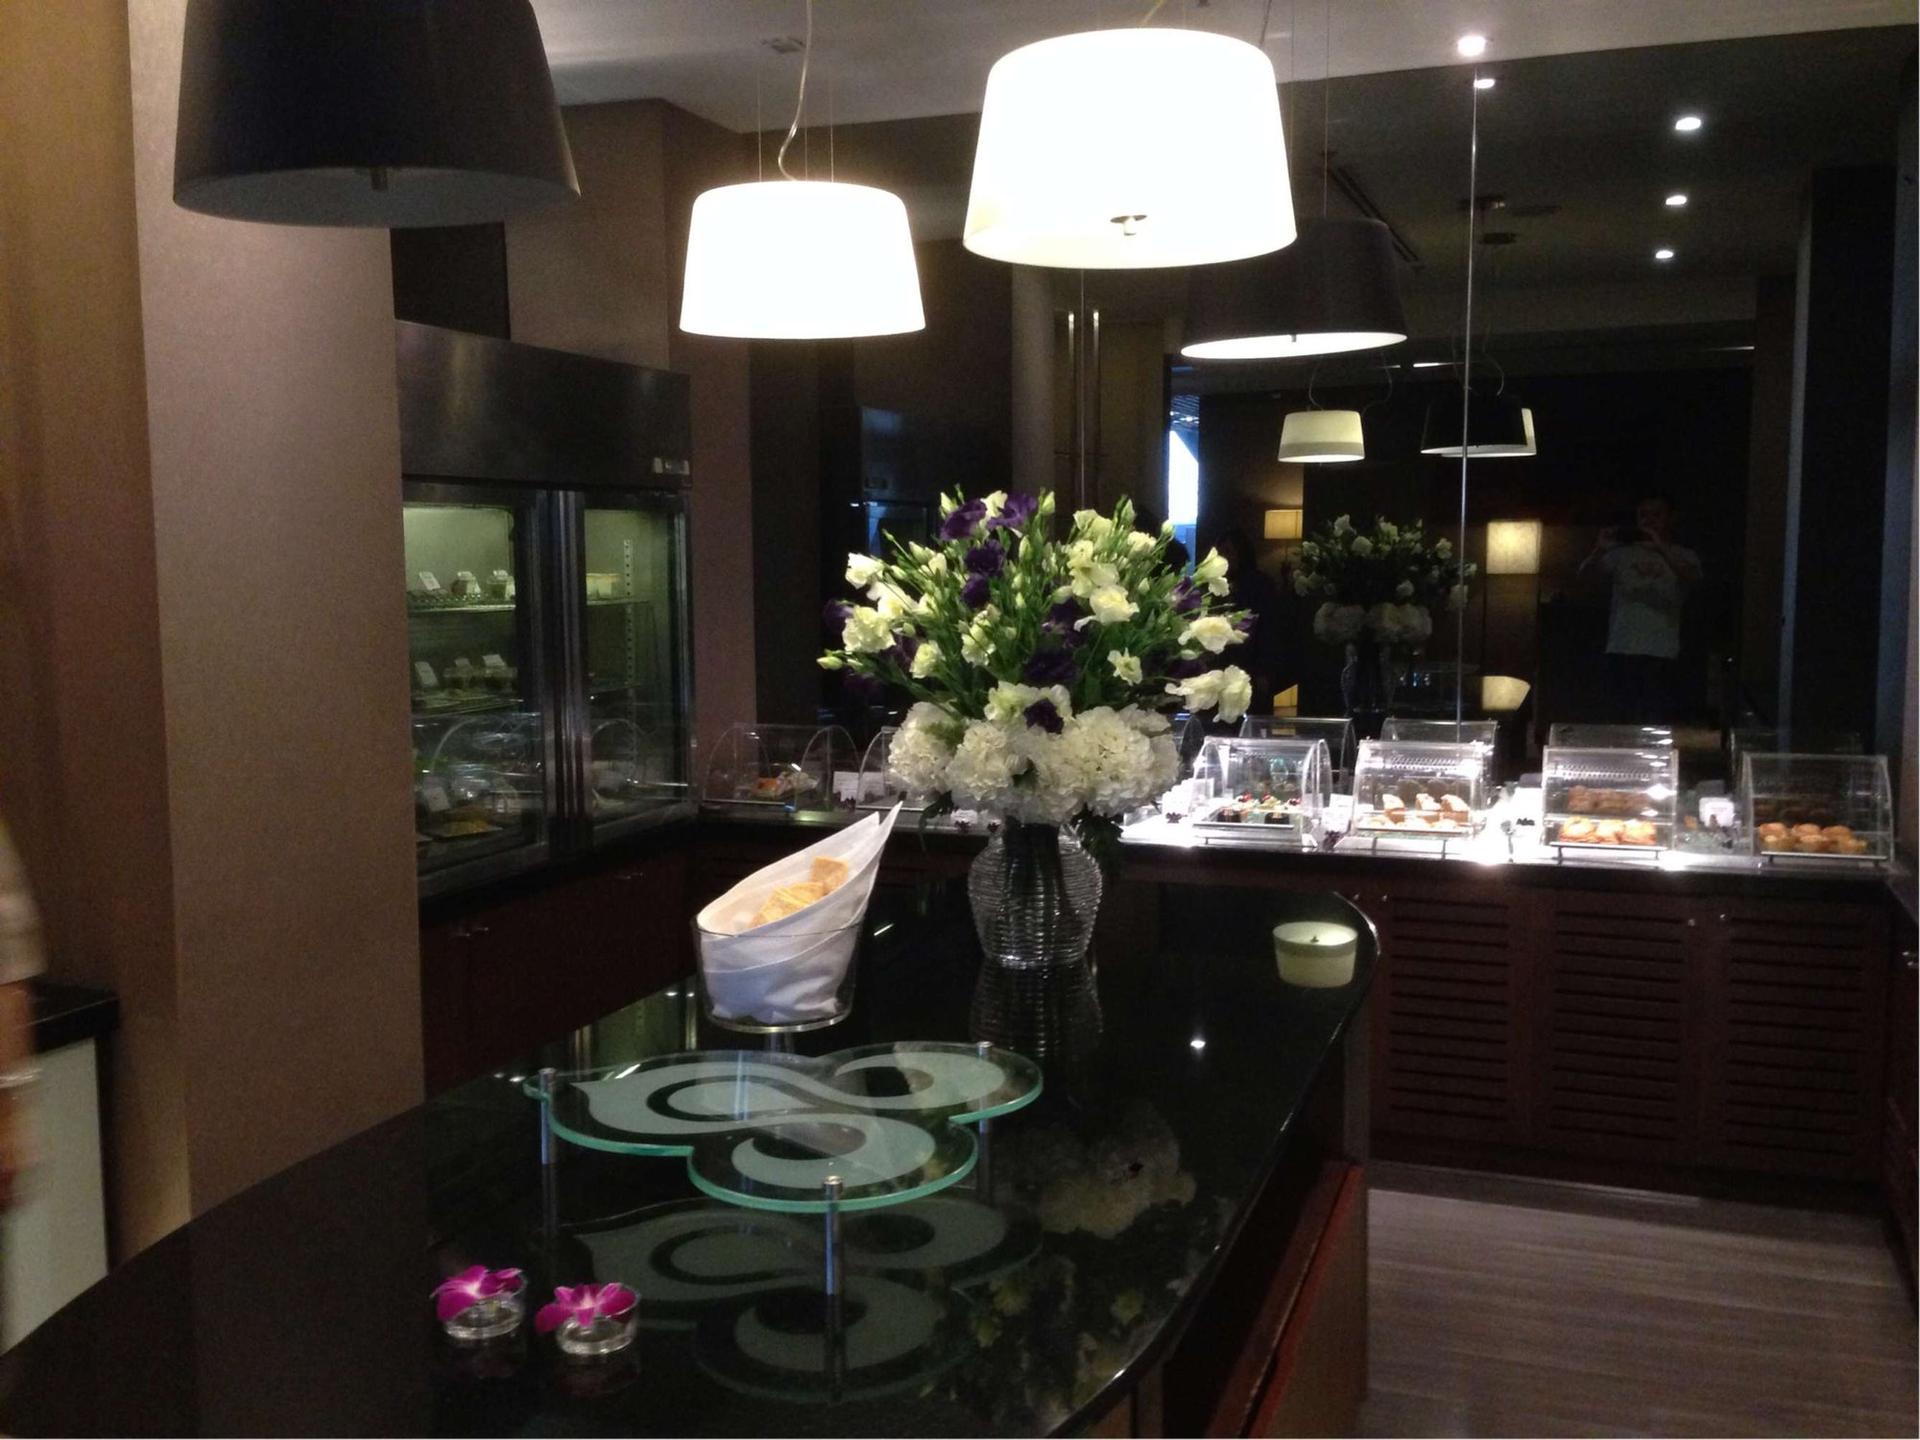 Thai Airways Royal First Class Lounge image 10 of 44